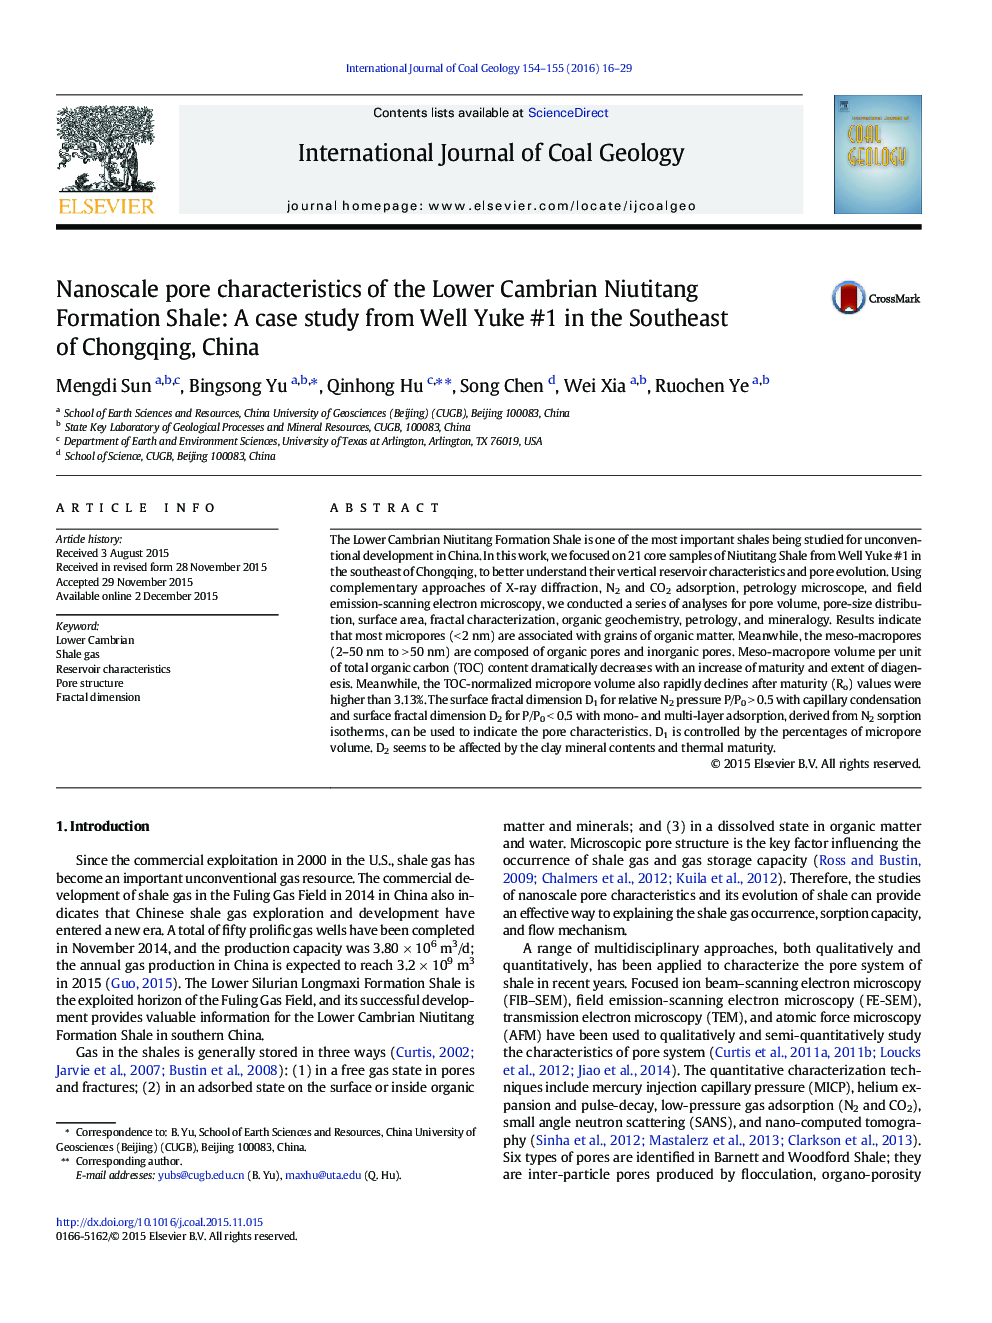 Nanoscale pore characteristics of the Lower Cambrian Niutitang Formation Shale: A case study from Well Yuke #1 in the Southeast of Chongqing, China